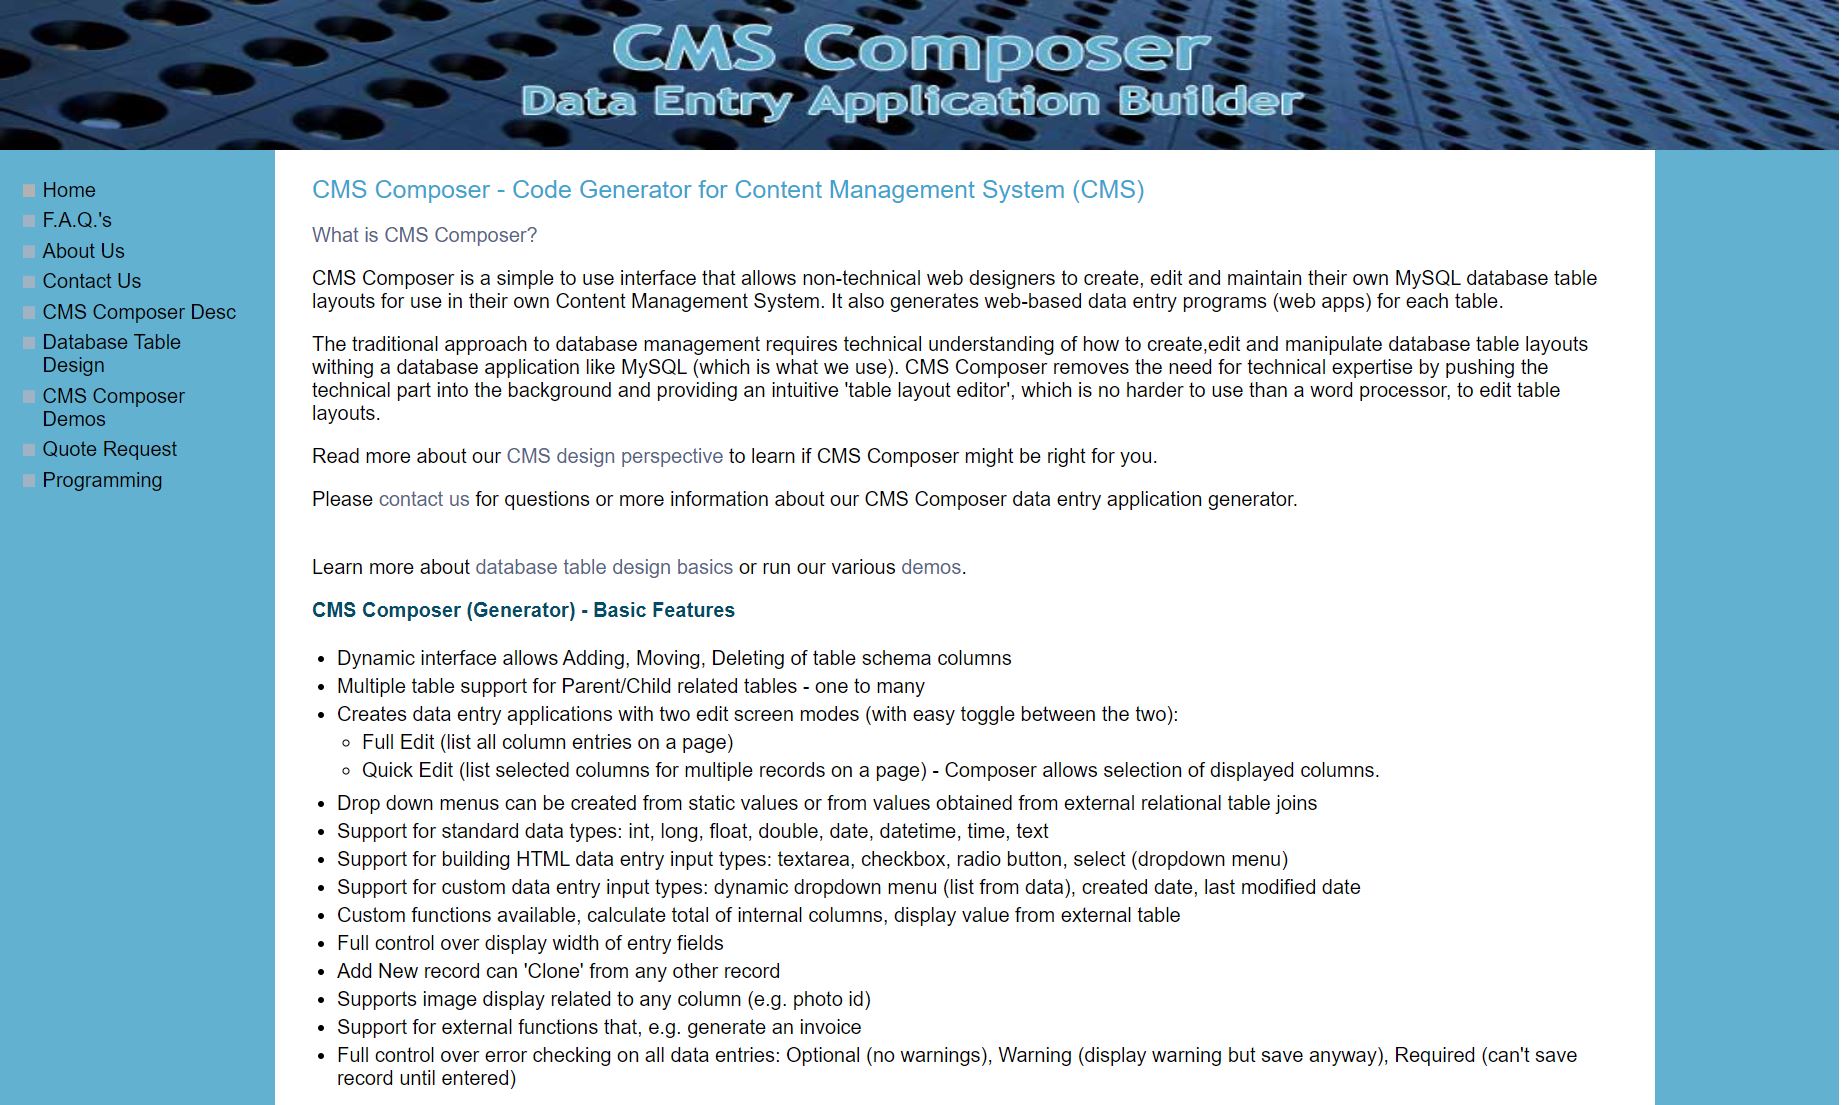 CMS Composer Homepage image